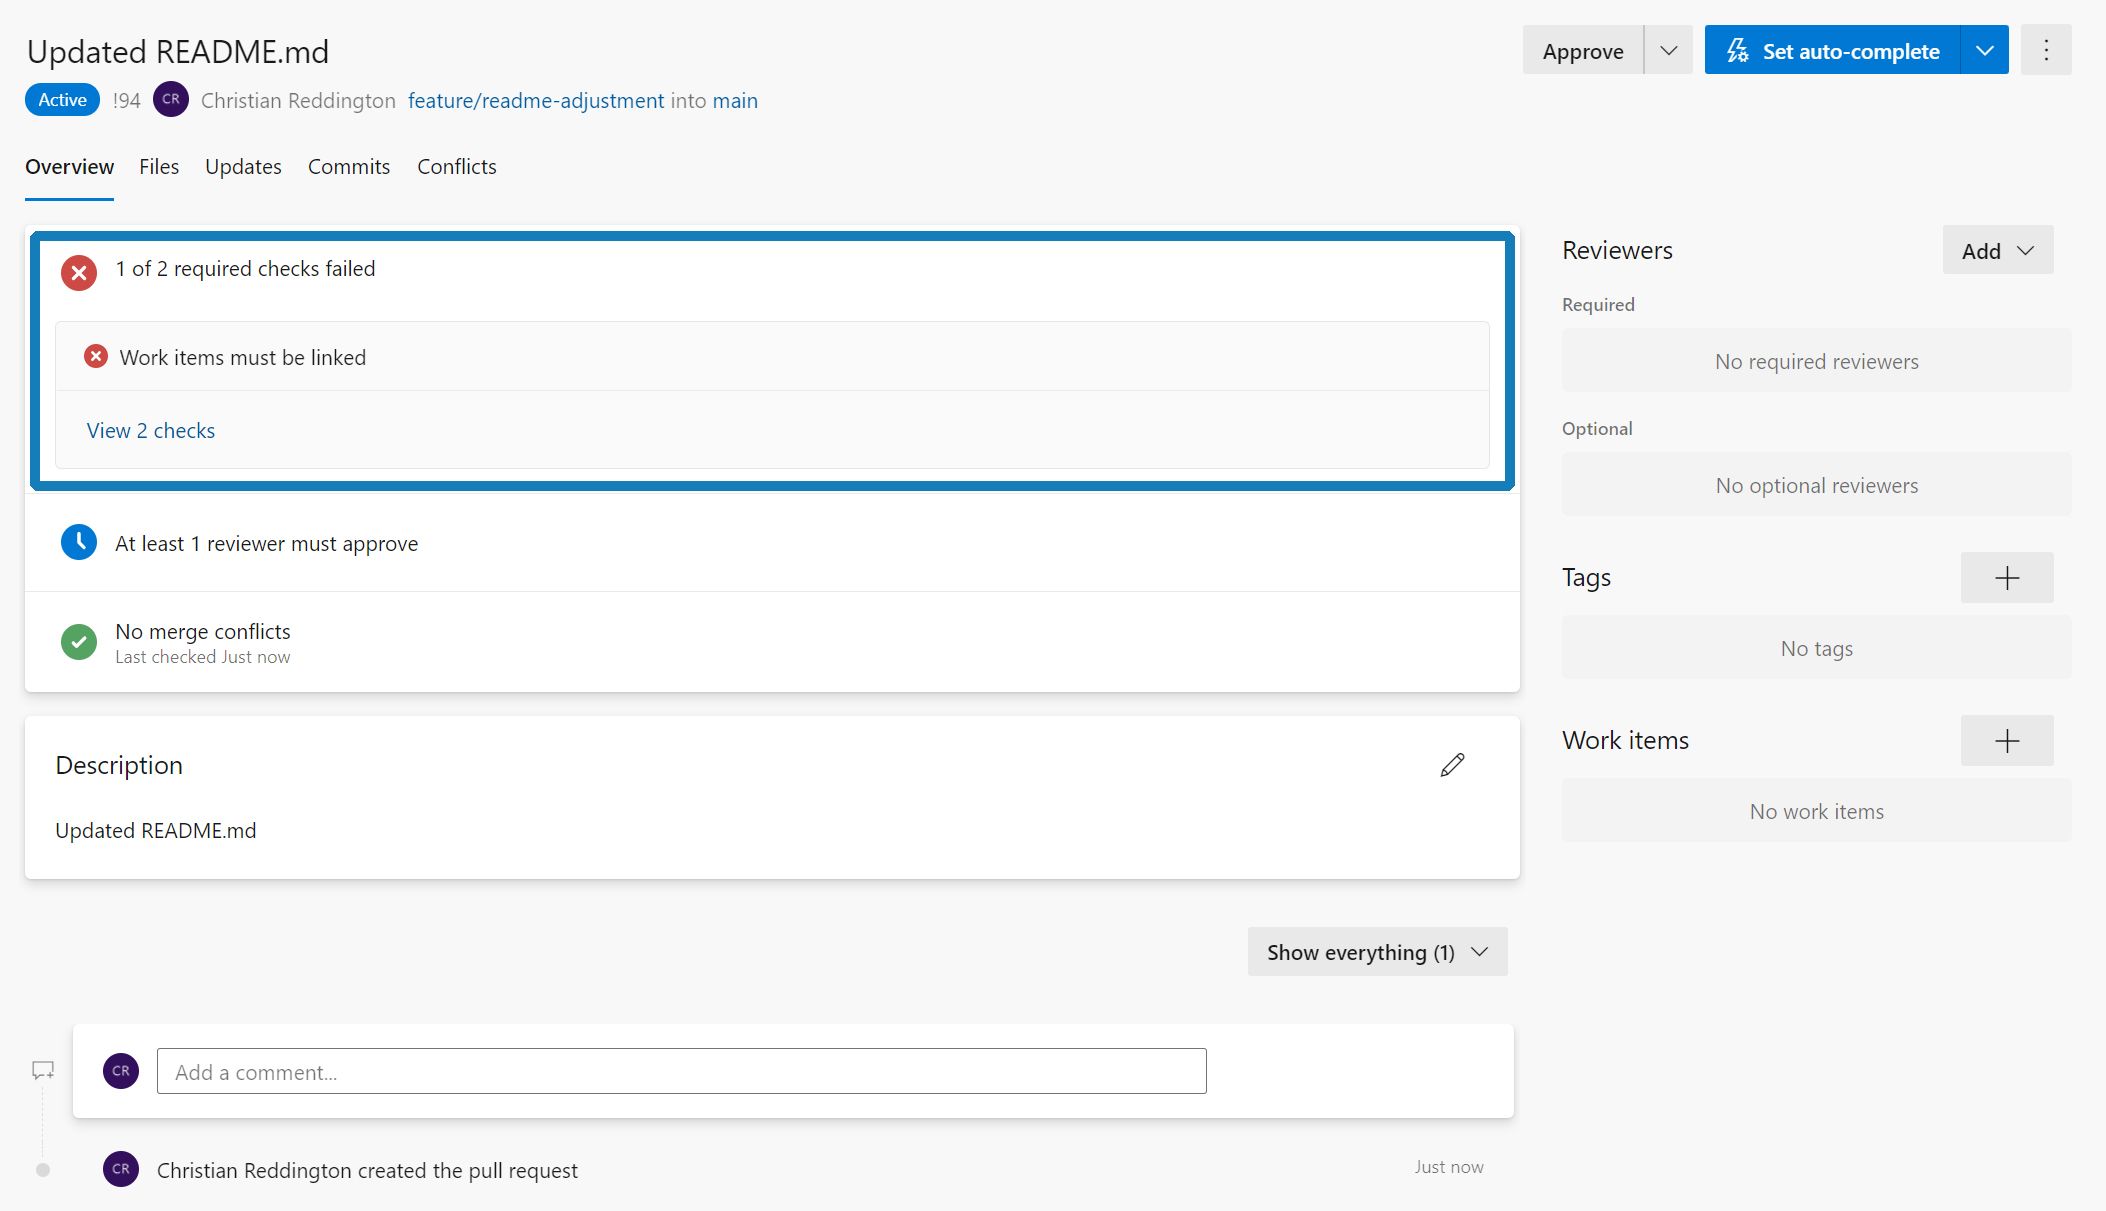 Screenshot showing a Pull Request which requires a work item to be linked, 1 reviewer and 1 reviewer to approve.